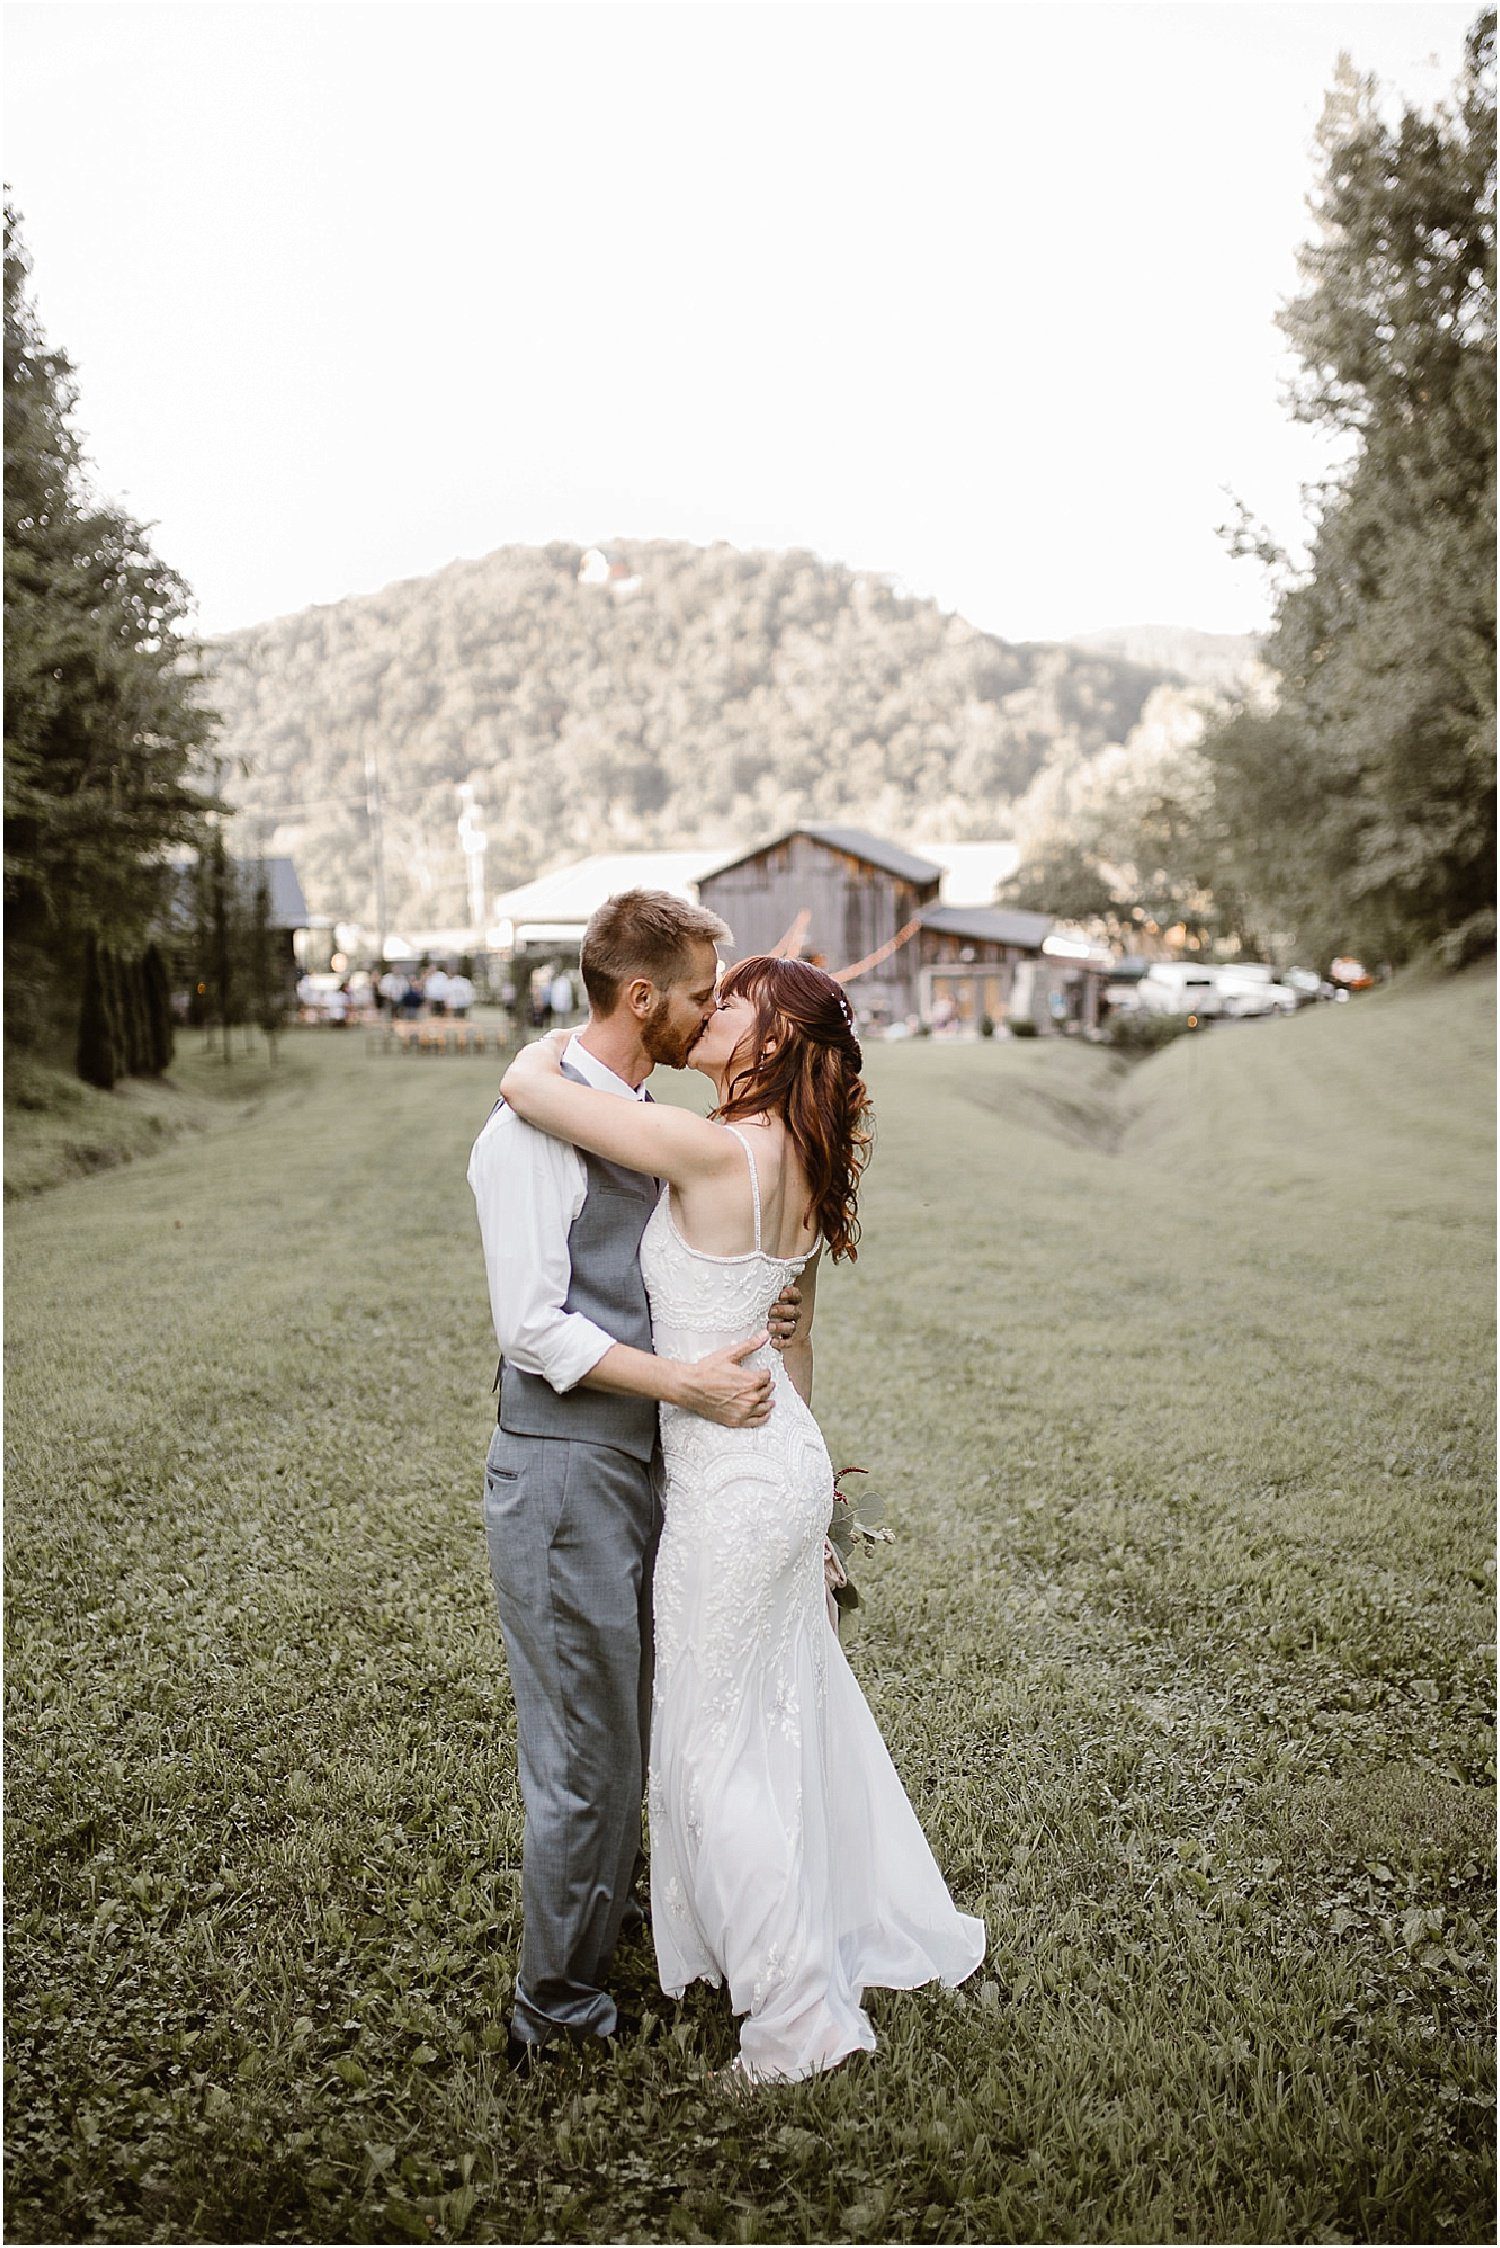 Bride and Groom Kiss on Wedding Day at The Barn at Chestnut Springs